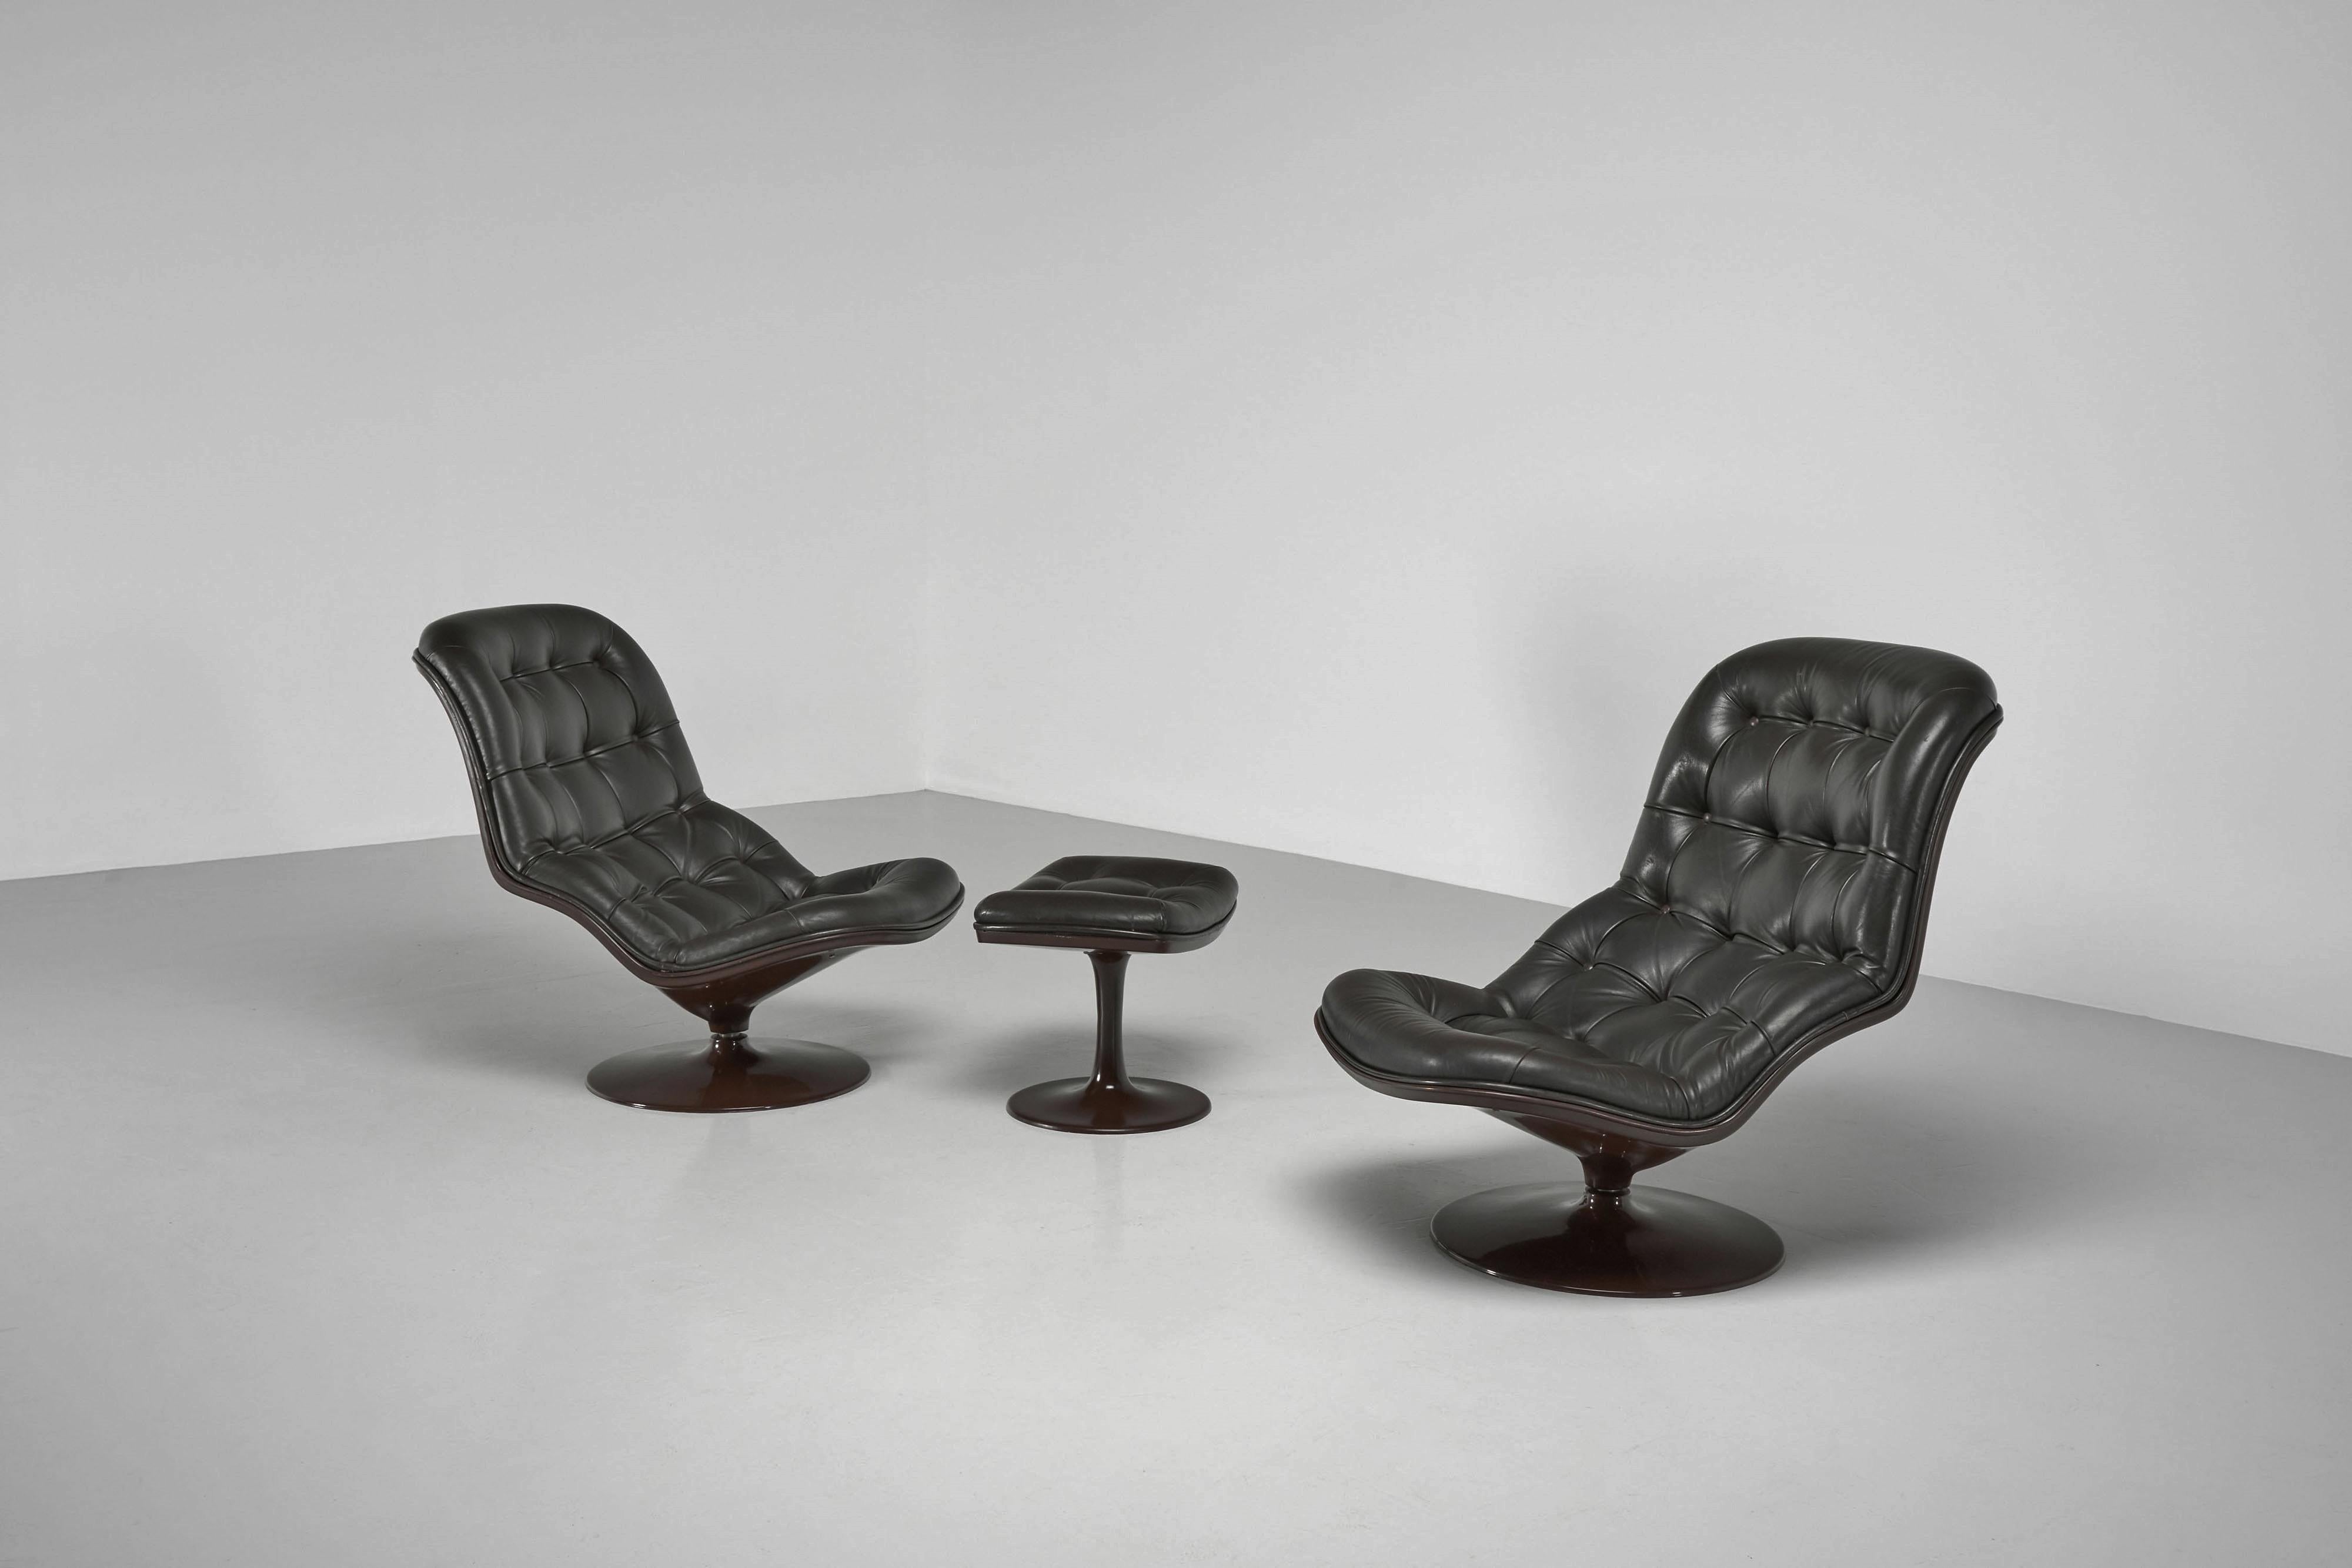 Mid-Century Modern Georges van Rijck Shelby lounge chairs Beaufort 1971